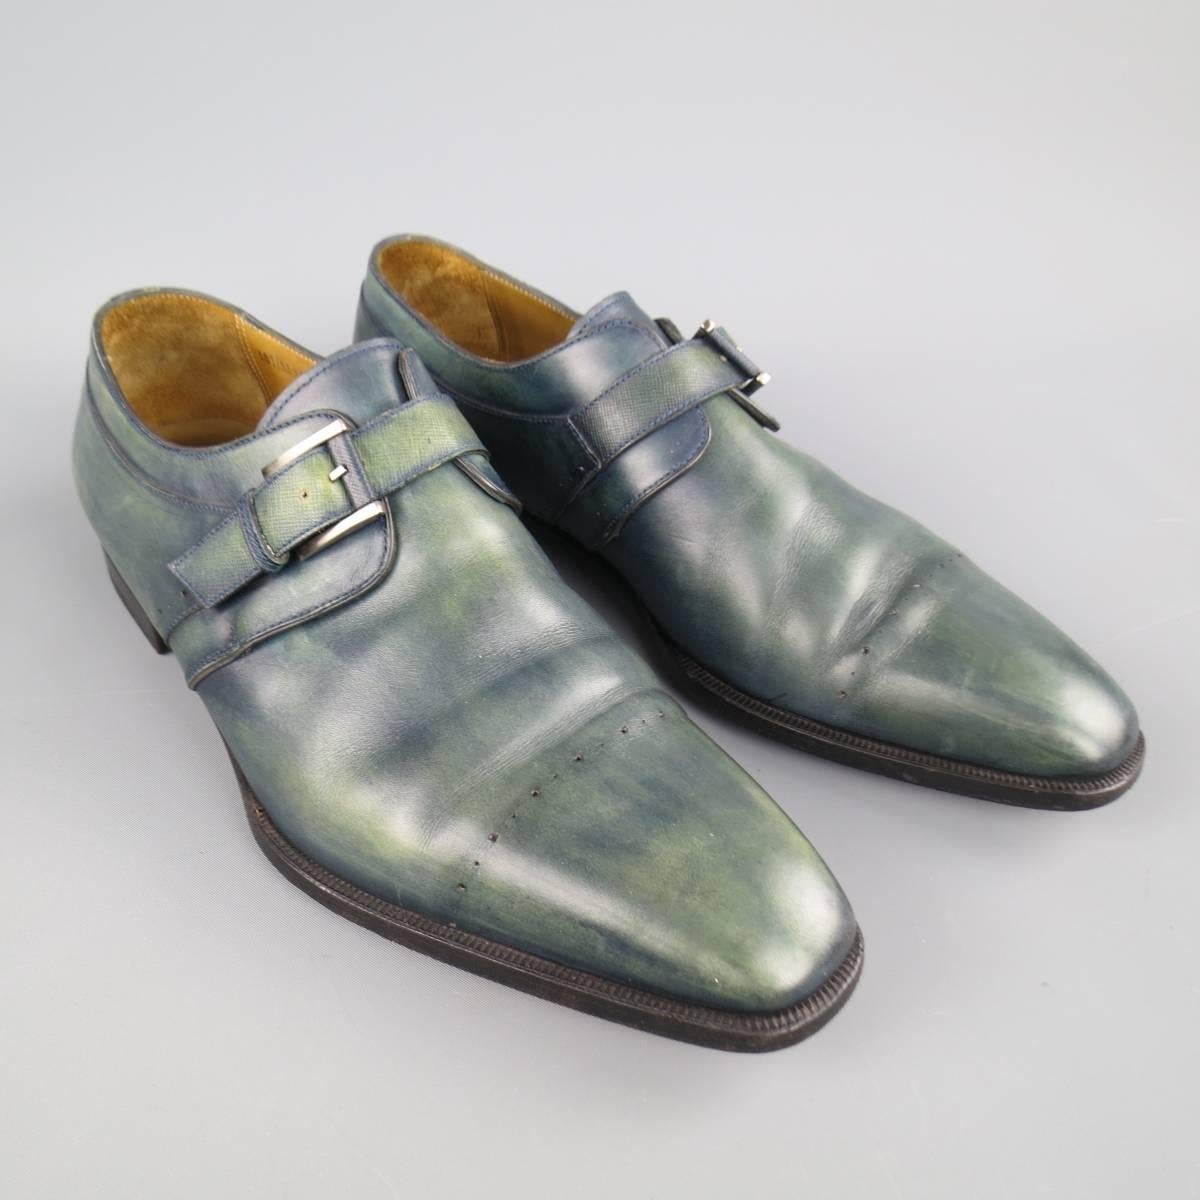 STEFANOBI dress shoes in a uniquely dyed teal green blue toned leather featuring a squared off pointed toe, perforated toe cap seam, and single monk strap closure. Made in Italy.
 
Excellent Pre-Owned Condition.
Marked: UK 10.5
 
Outsole: 12 x 4.45